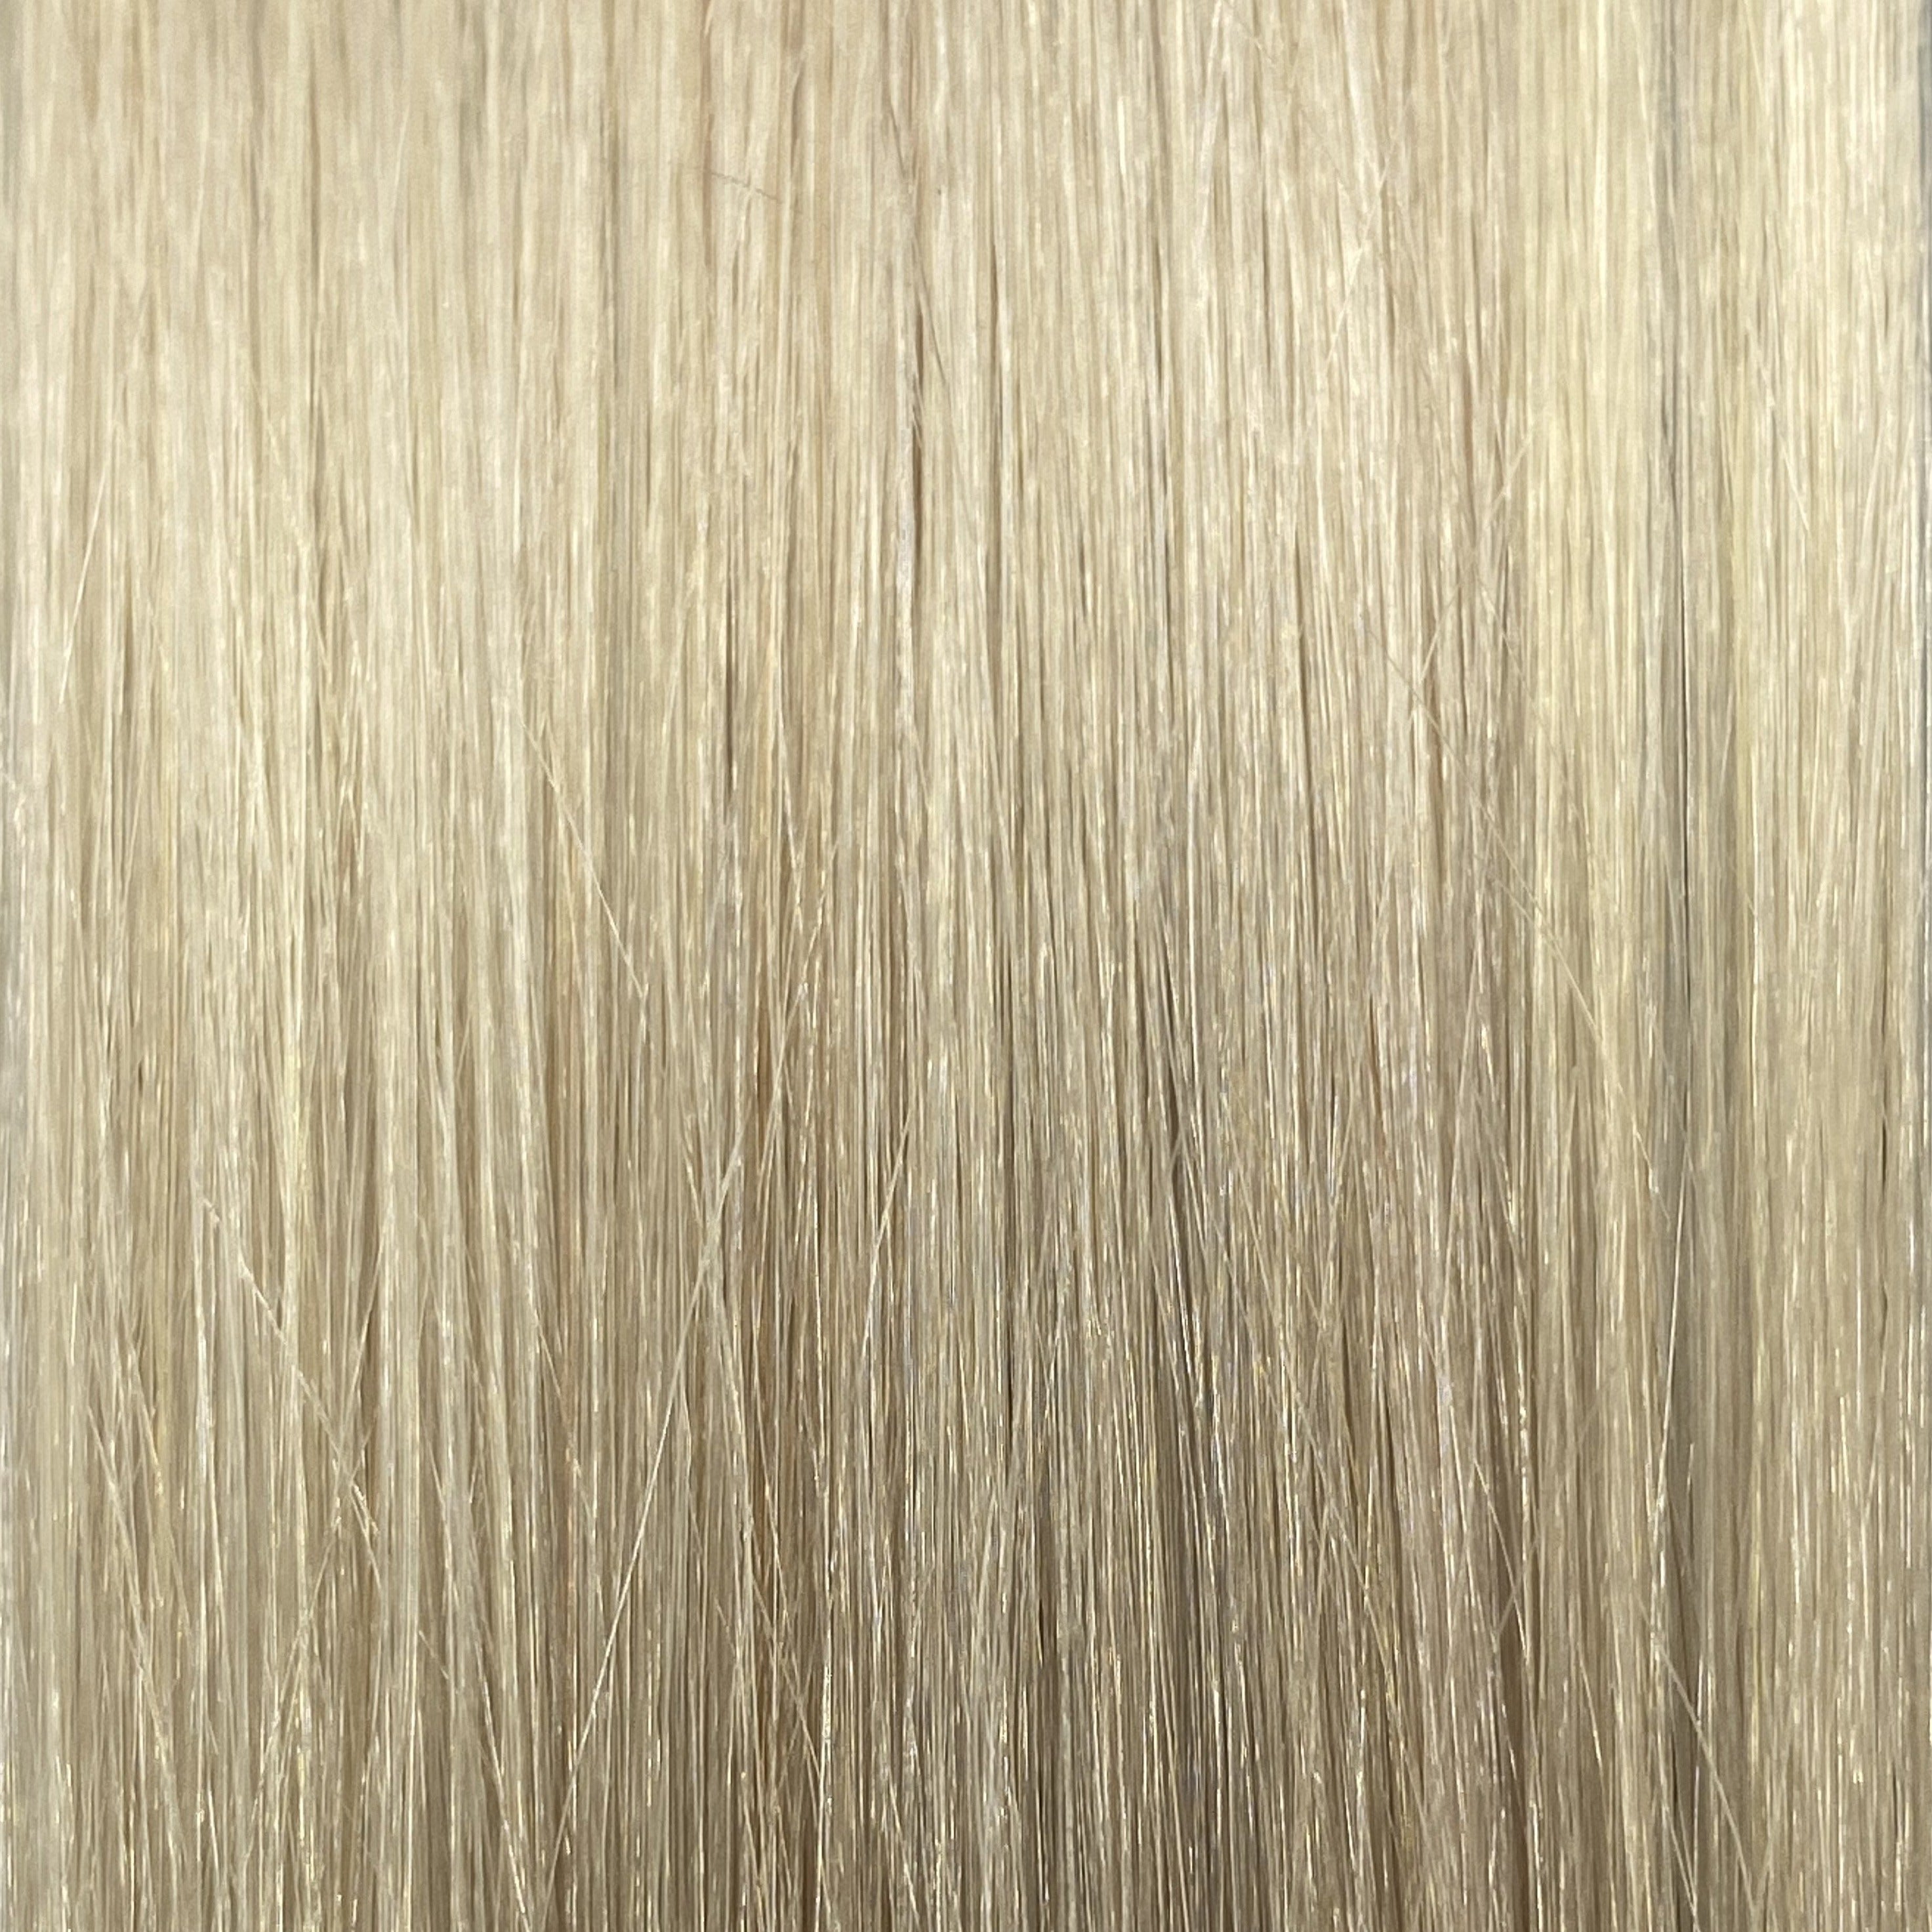 FUSION #1004 ULTRA VERY LIGHT PLATINUM BLONDE 40CM/ 16 INCHES  - 17.5 GRAMS